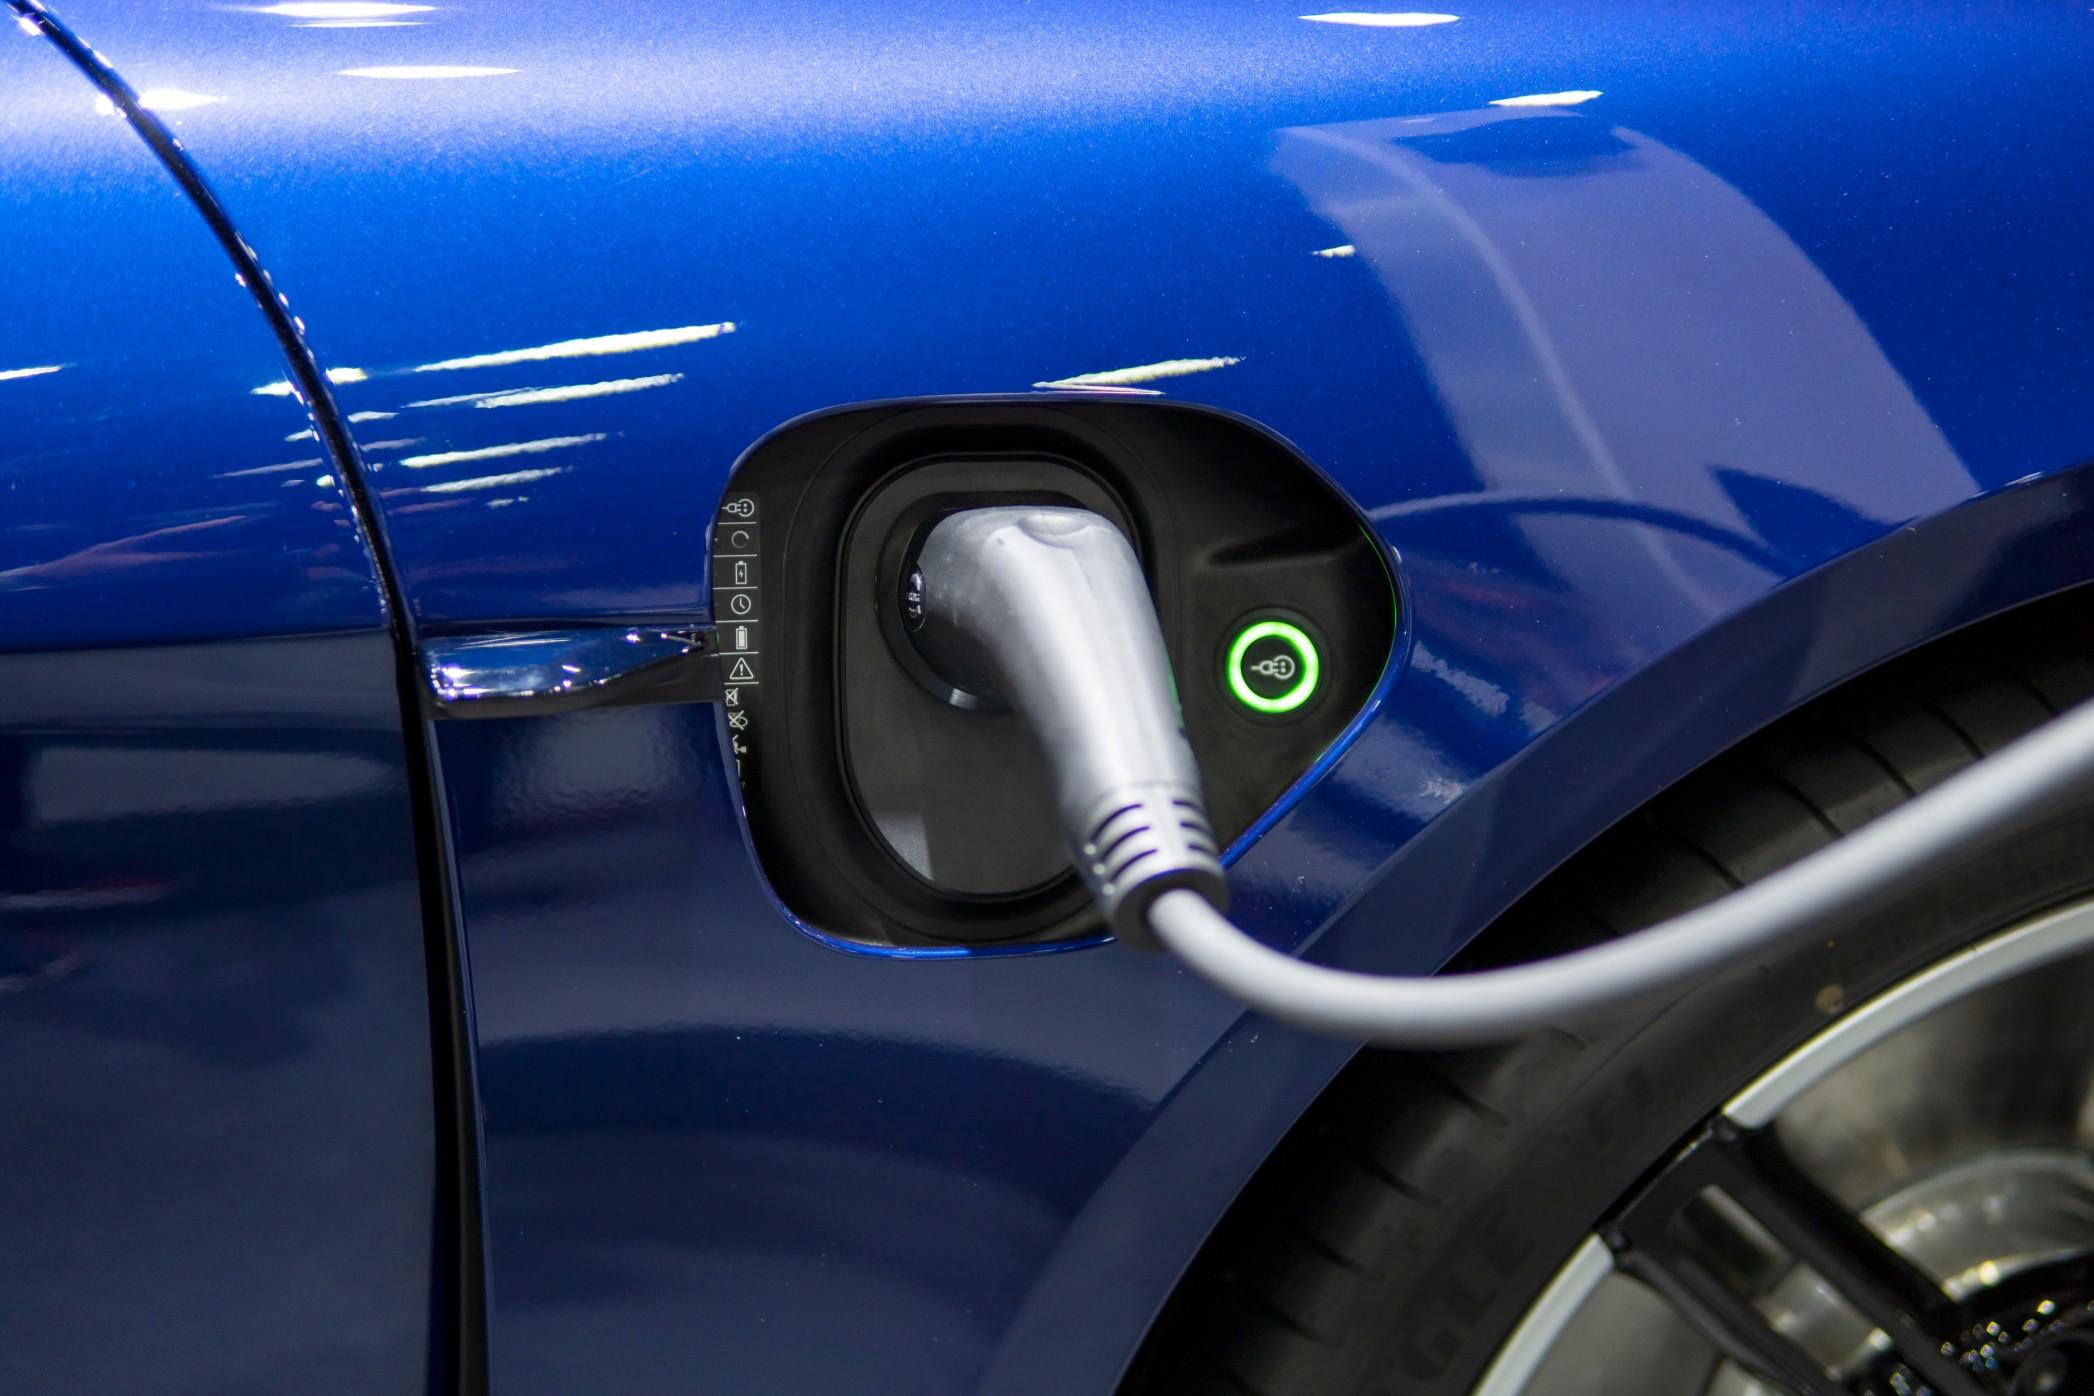 A Swiss company launched the world’s fastest EV charger.